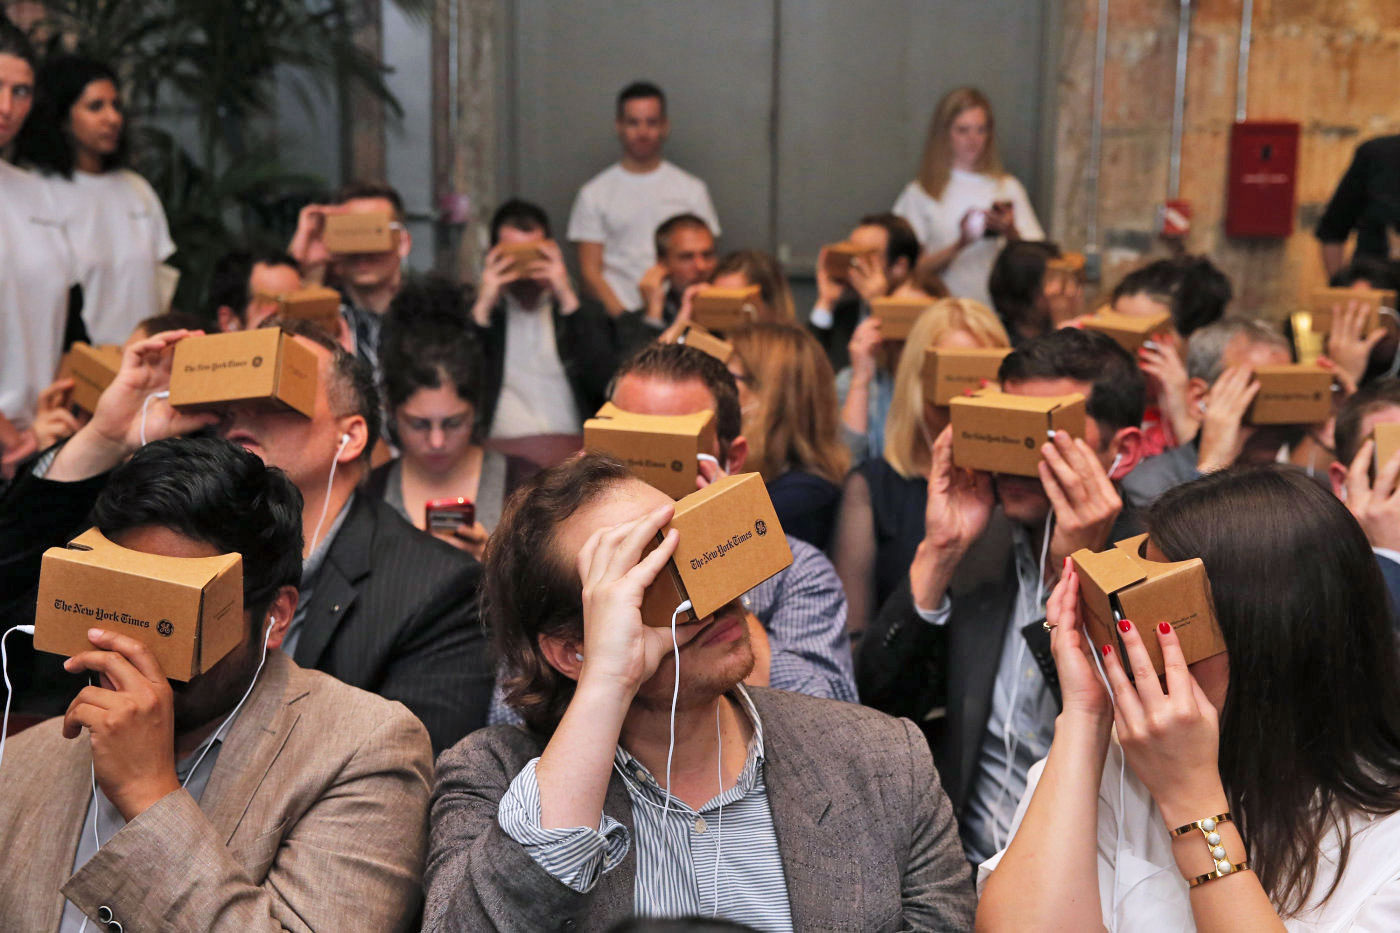 NY Times sends 300,000 Google Cardboard viewers to subscribers